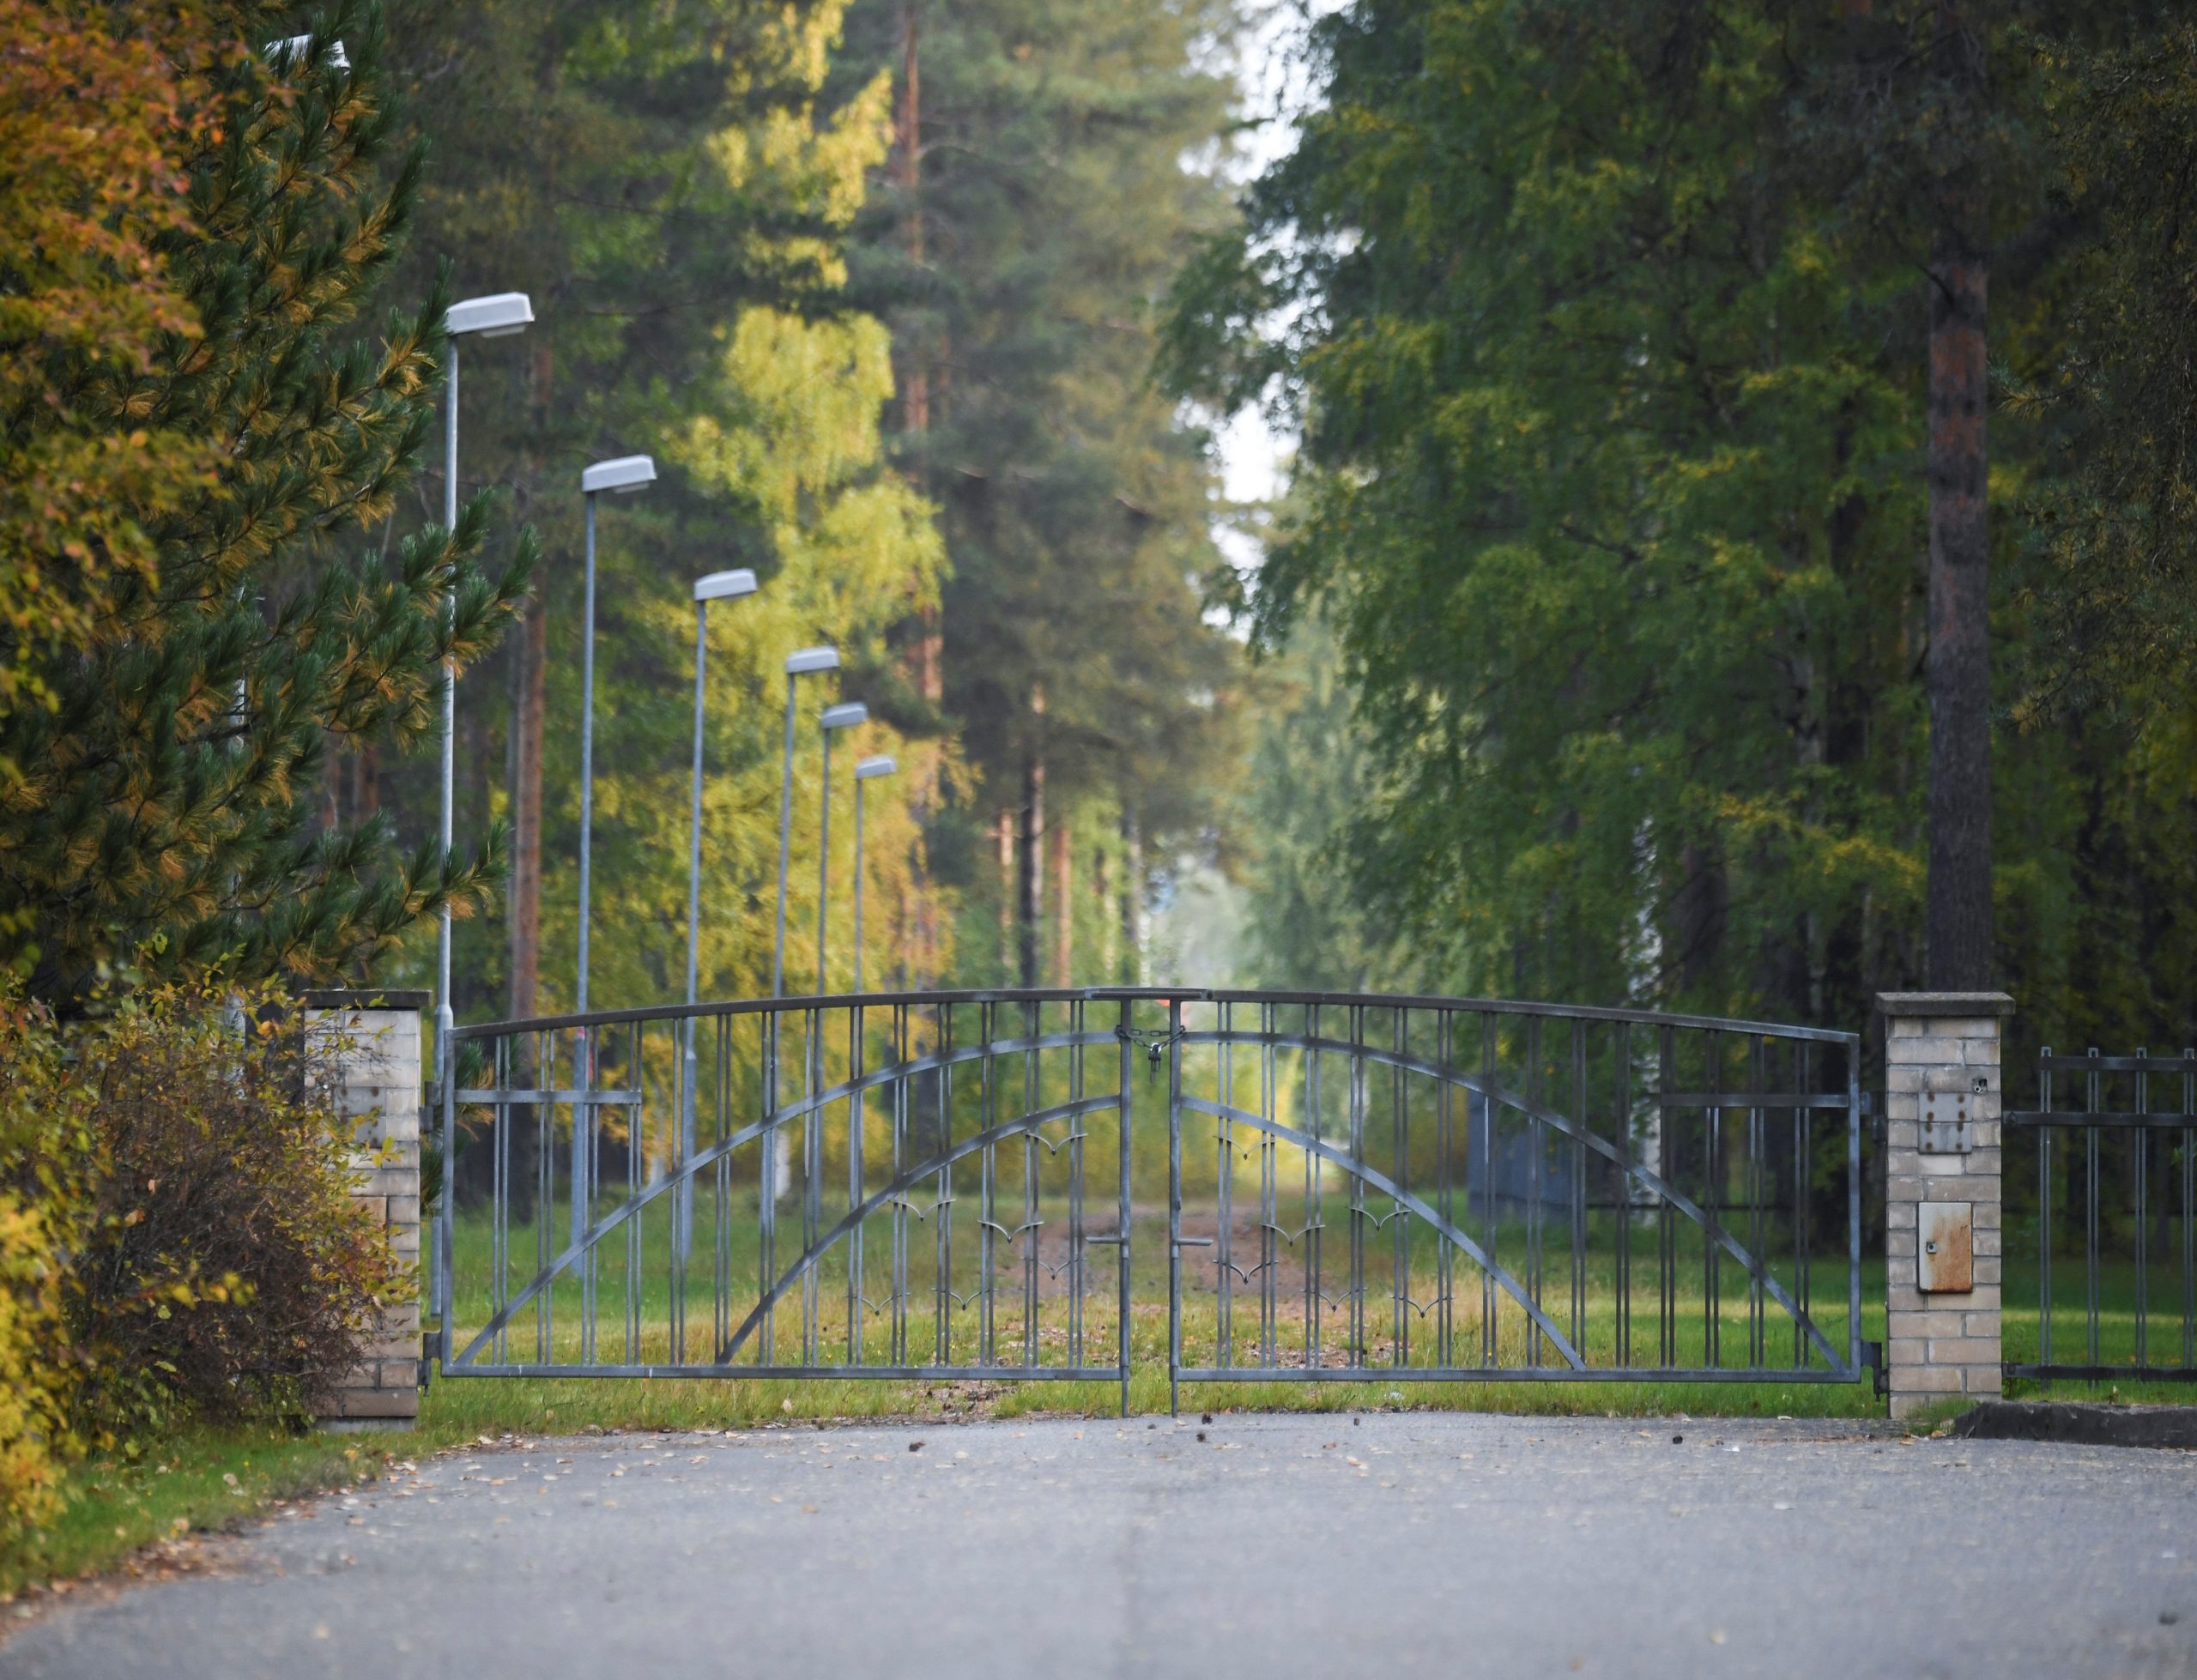 Transnational death: a closed cemetery gate, without visible graves